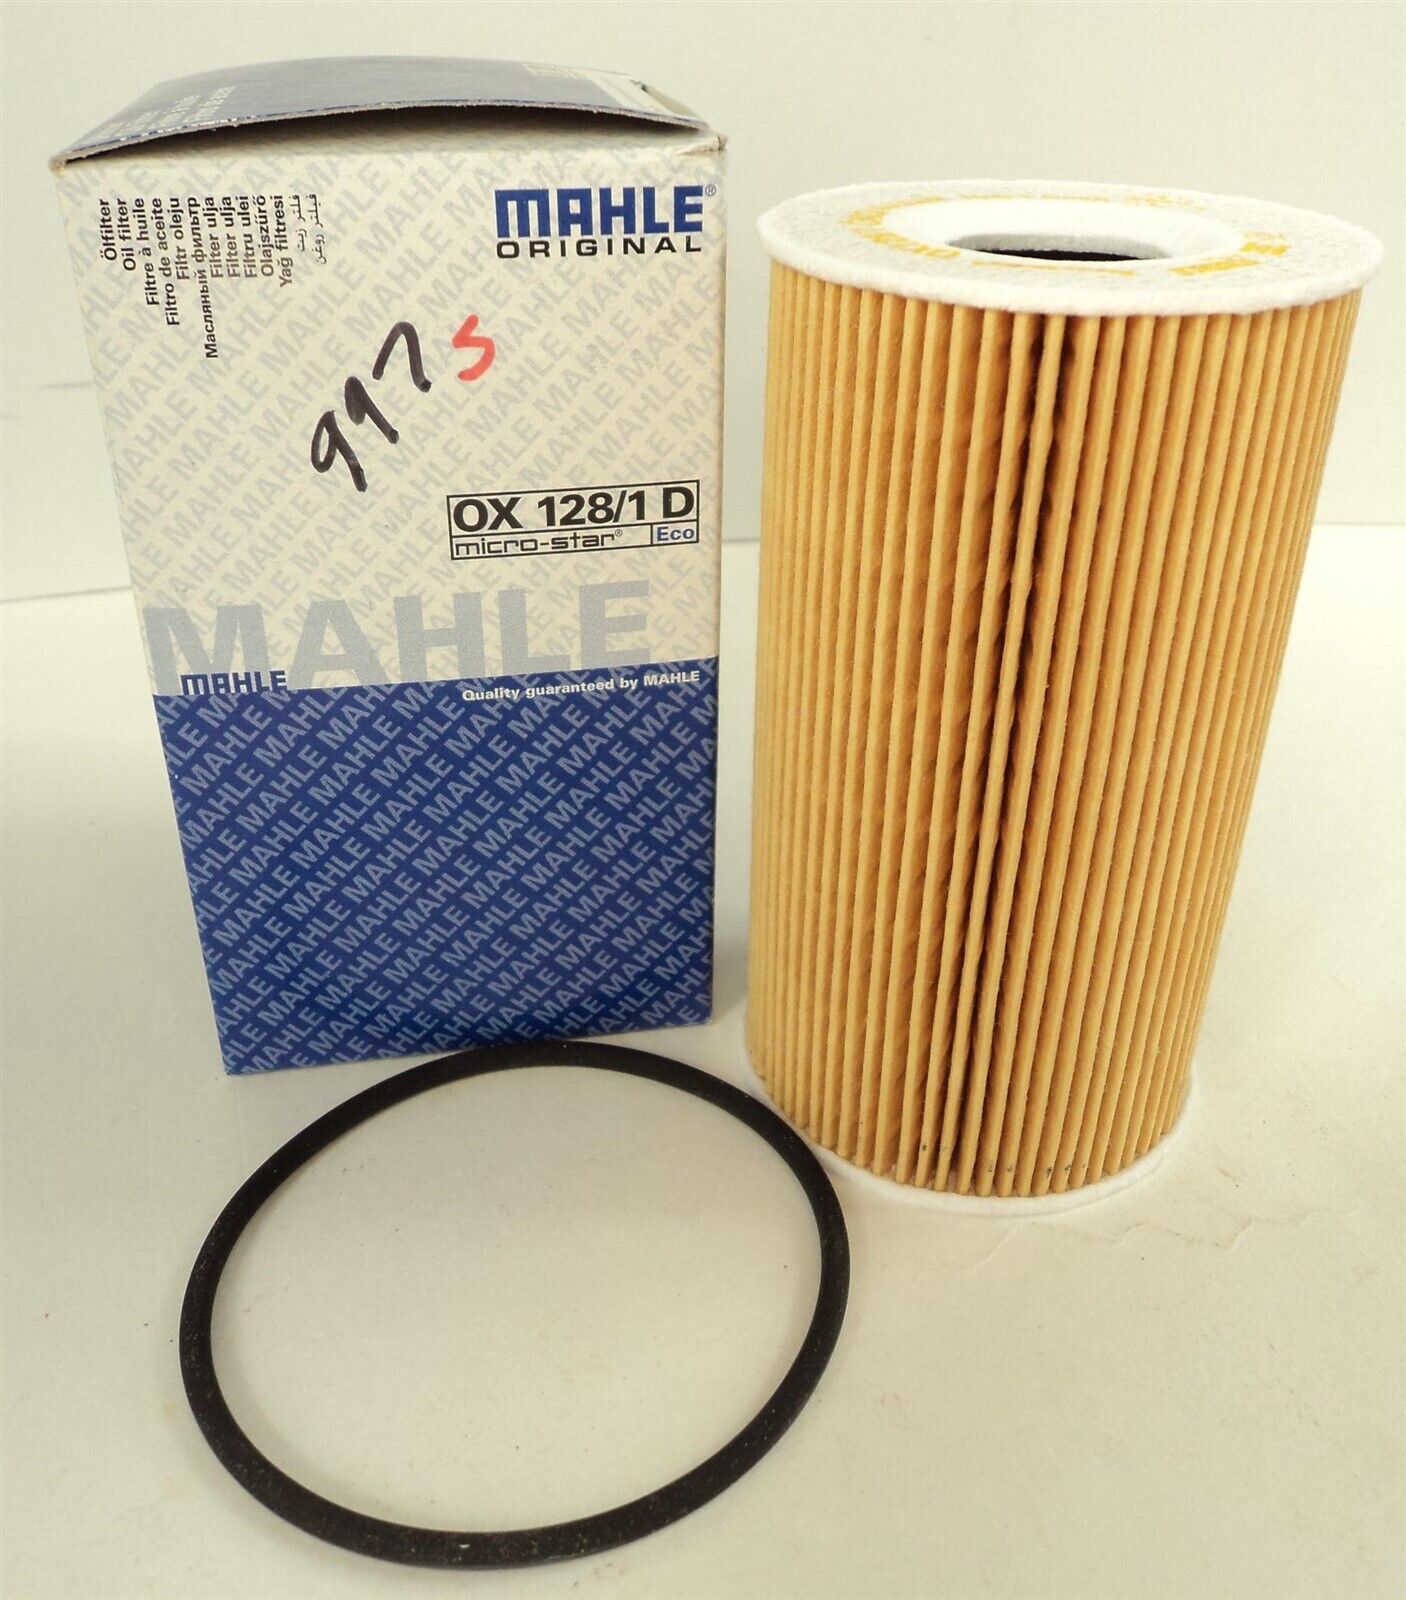 Engine Oil Filter Mahle OX 128/1 D For Porsche Boxster Cayman Cayenne